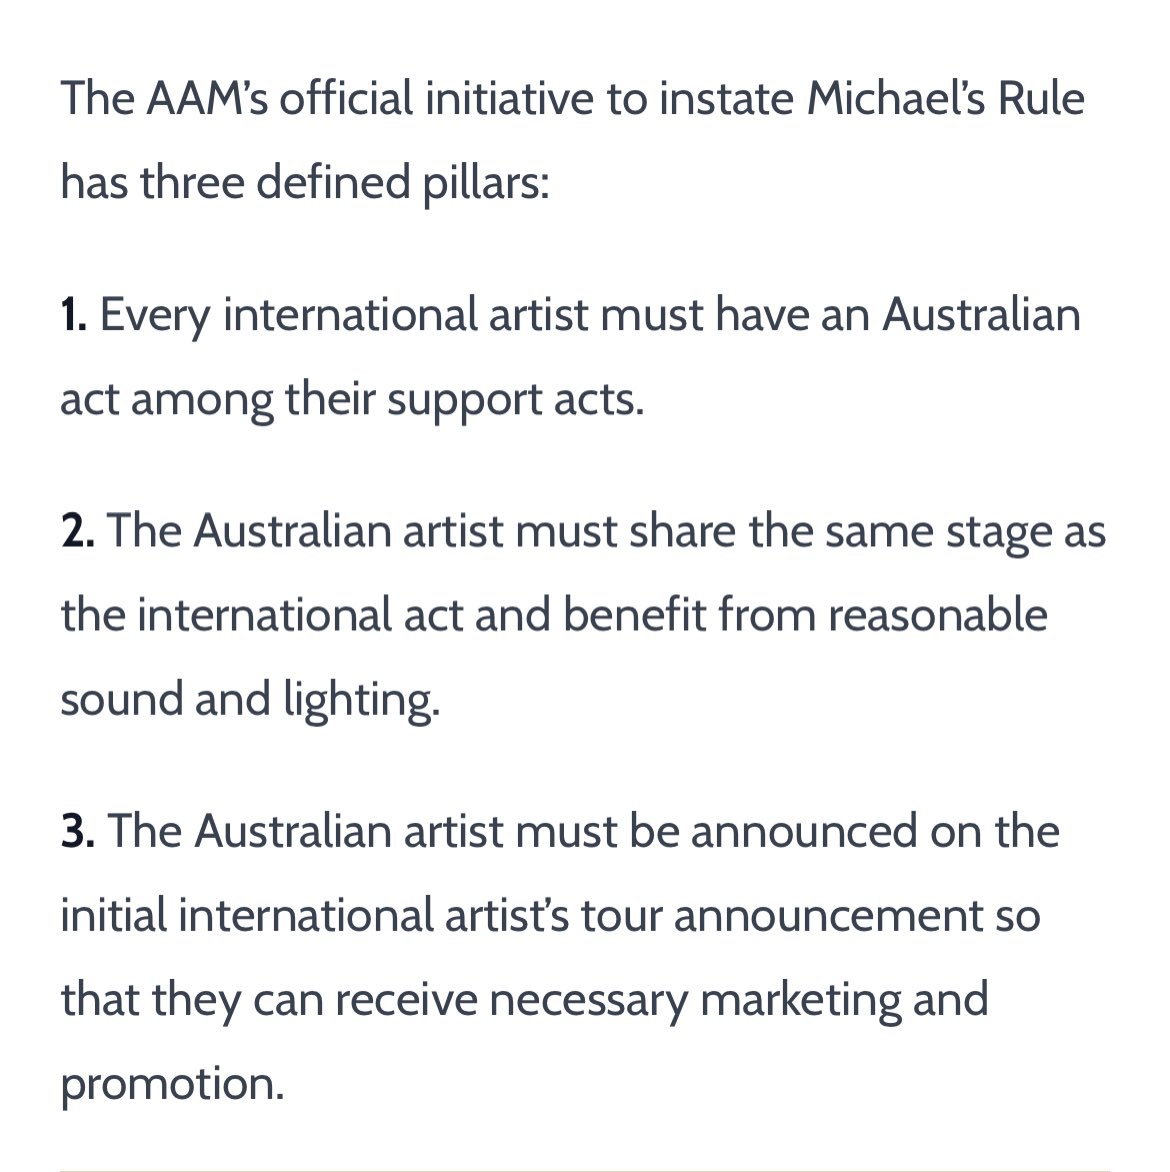 Louis Tomlinson, Foo Fighters and P!nk are some examples of international artists using Aussie supports - we have so many great musicians here to choose from, it’s not hard!! 

#livemusic #australianmusic #tour